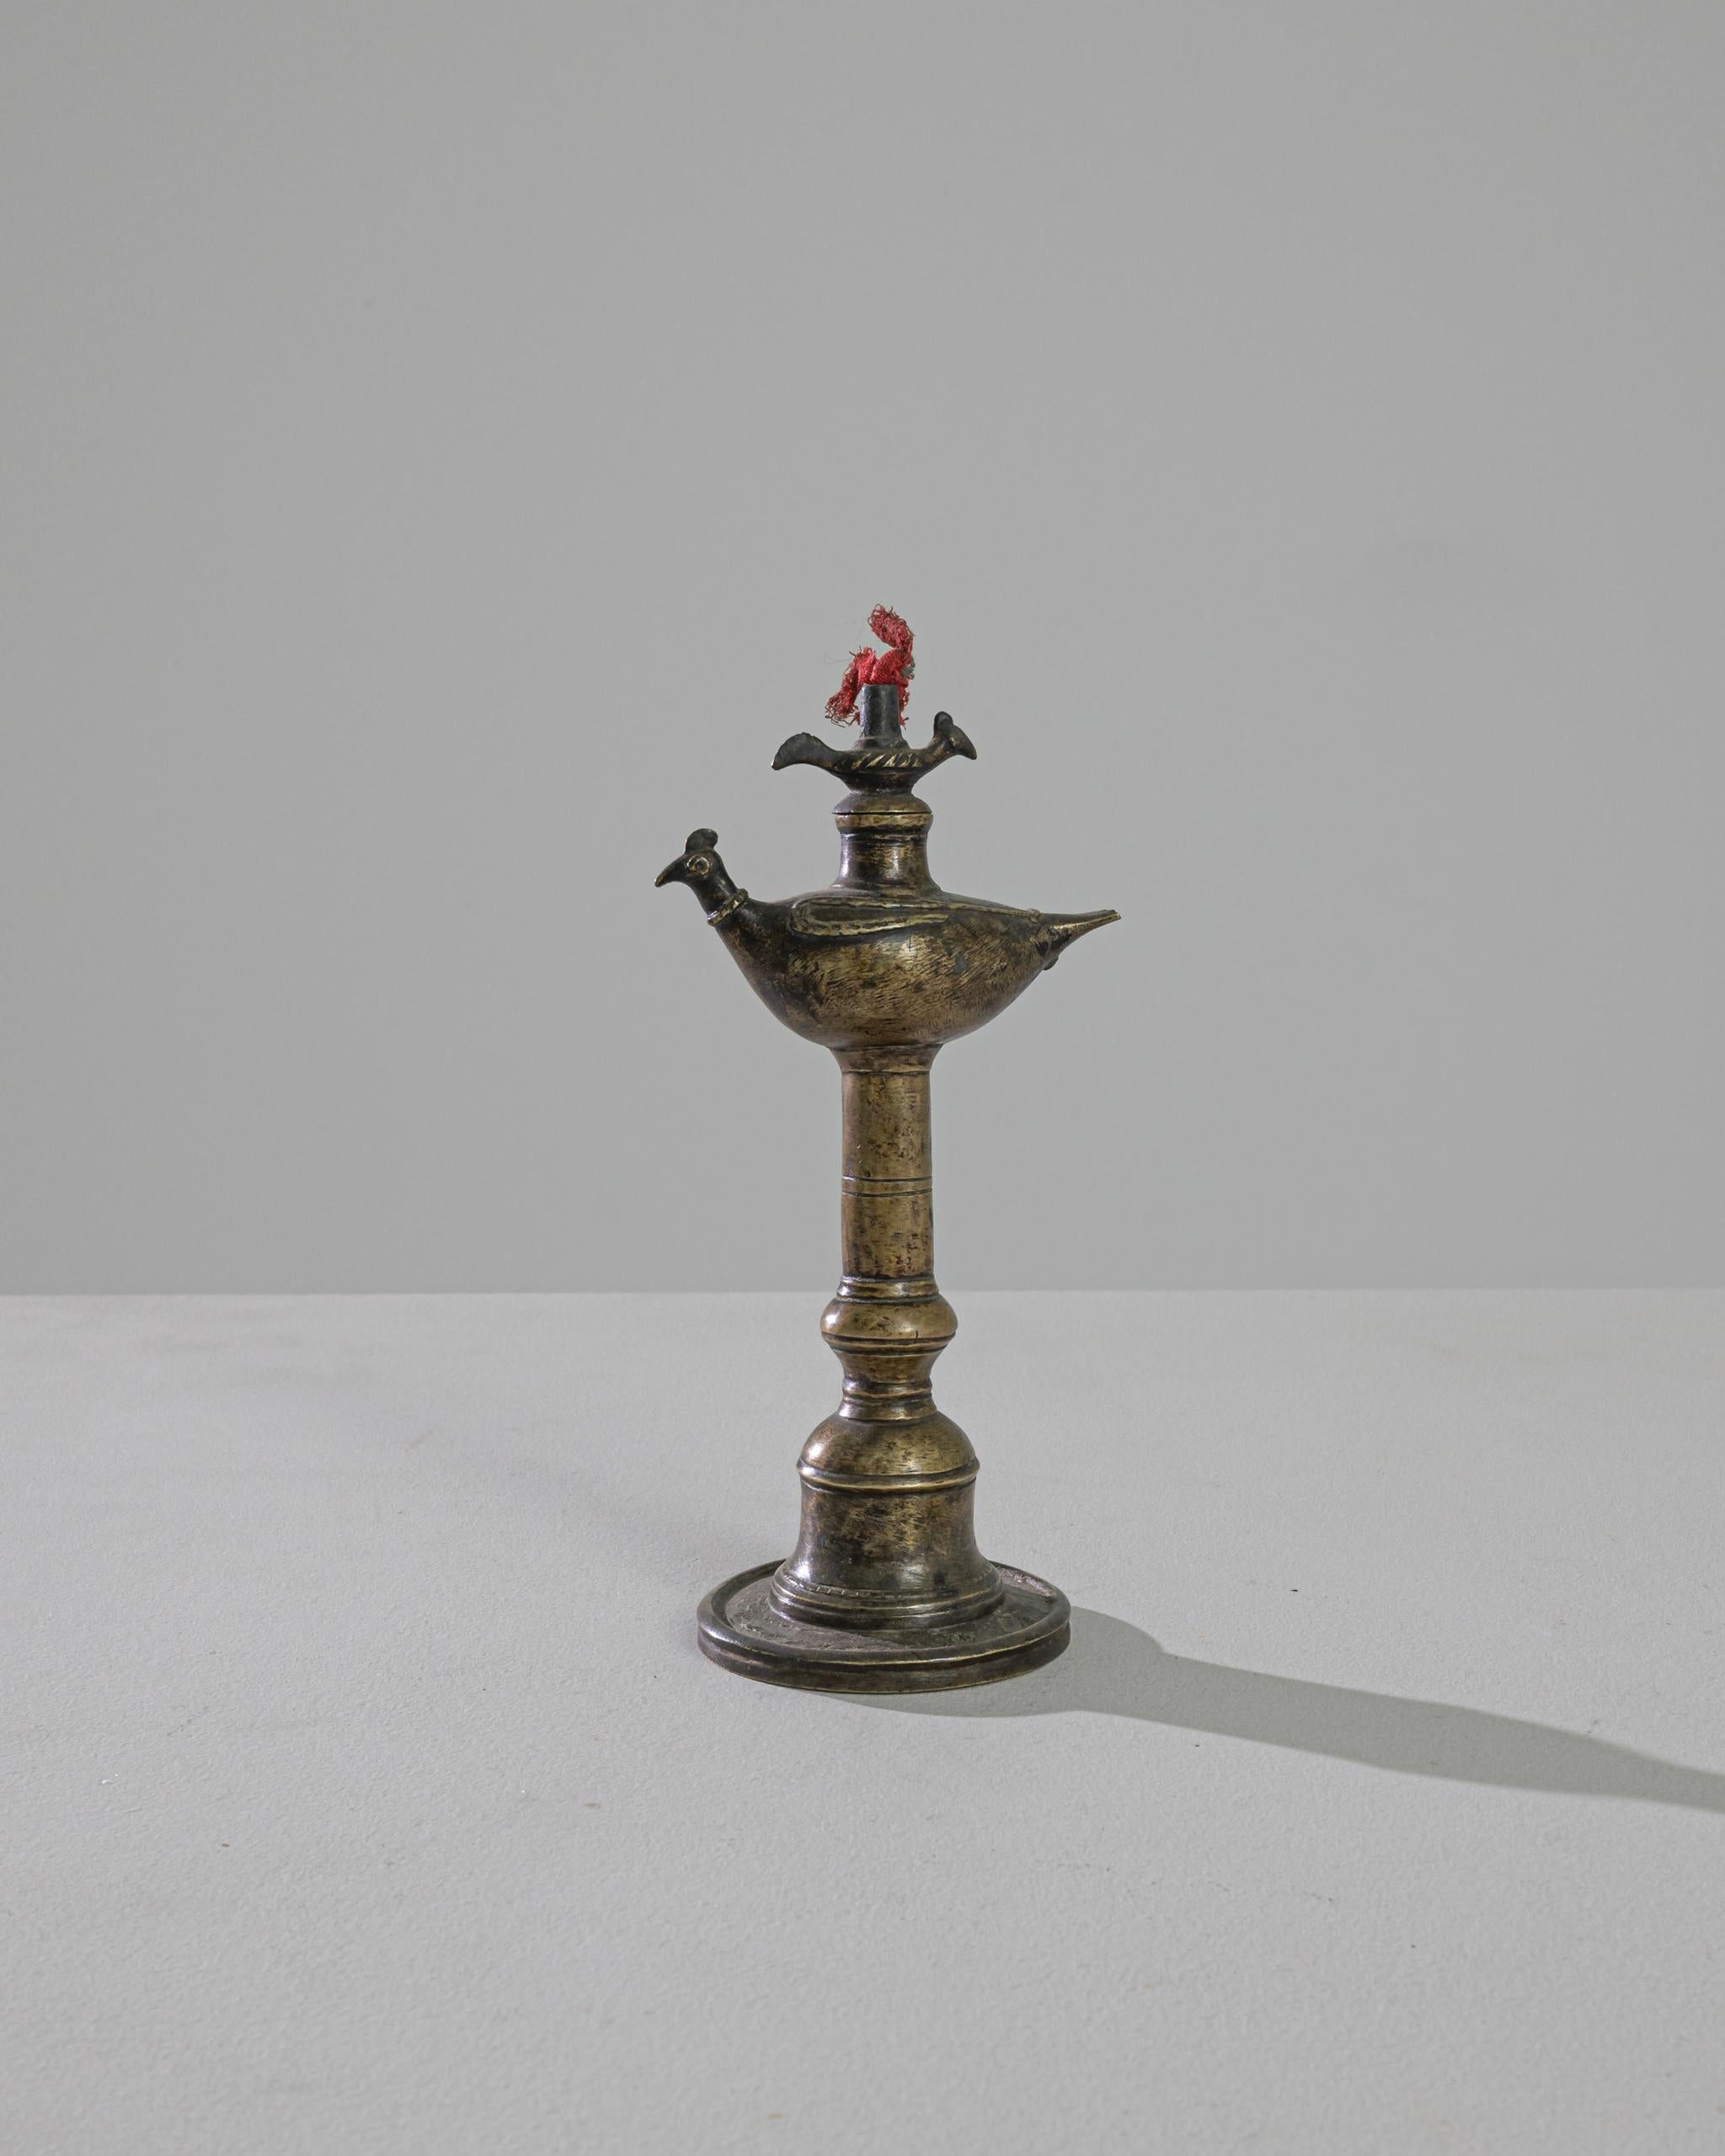 A brass oil lamp from Tibet, this piece displays a little elephant on top of an ornamented column resembling a bell. With a miniature friend flying above, this expectant fowl is poised for the fire to start. The authentic patina exhibits golden